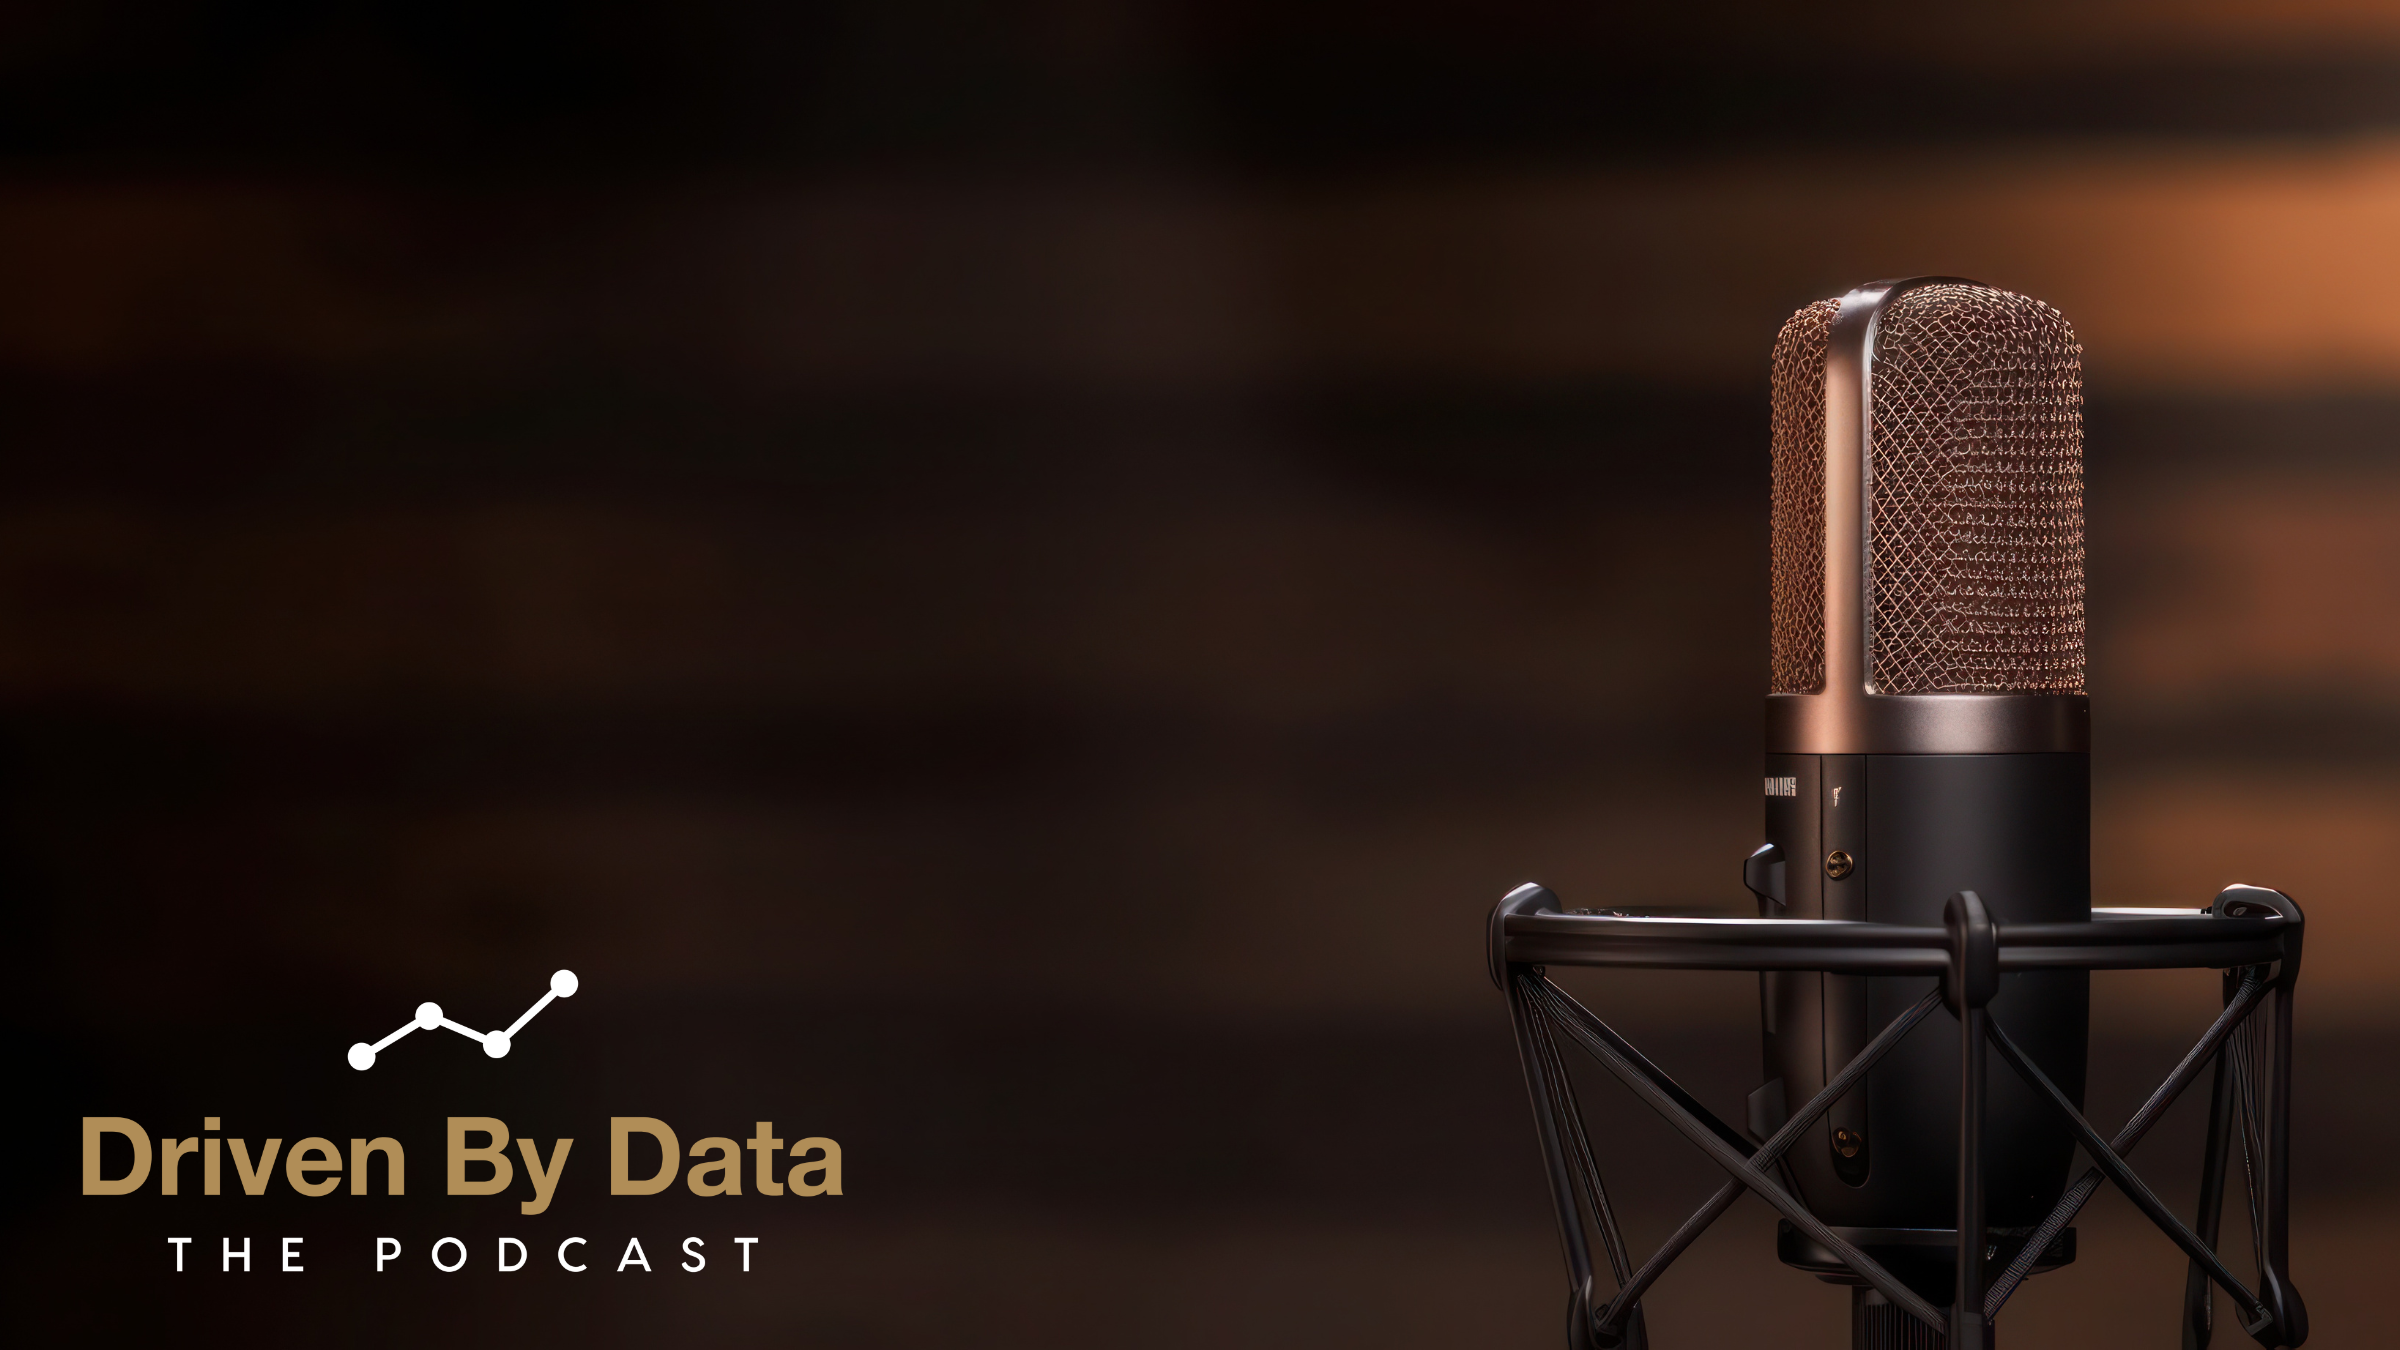 S3 | Ep 36 | The Role of Data Visualisation in Driving Change and Realising Value with Andy Cotgreave, Senior Data Evangelist at Tableau